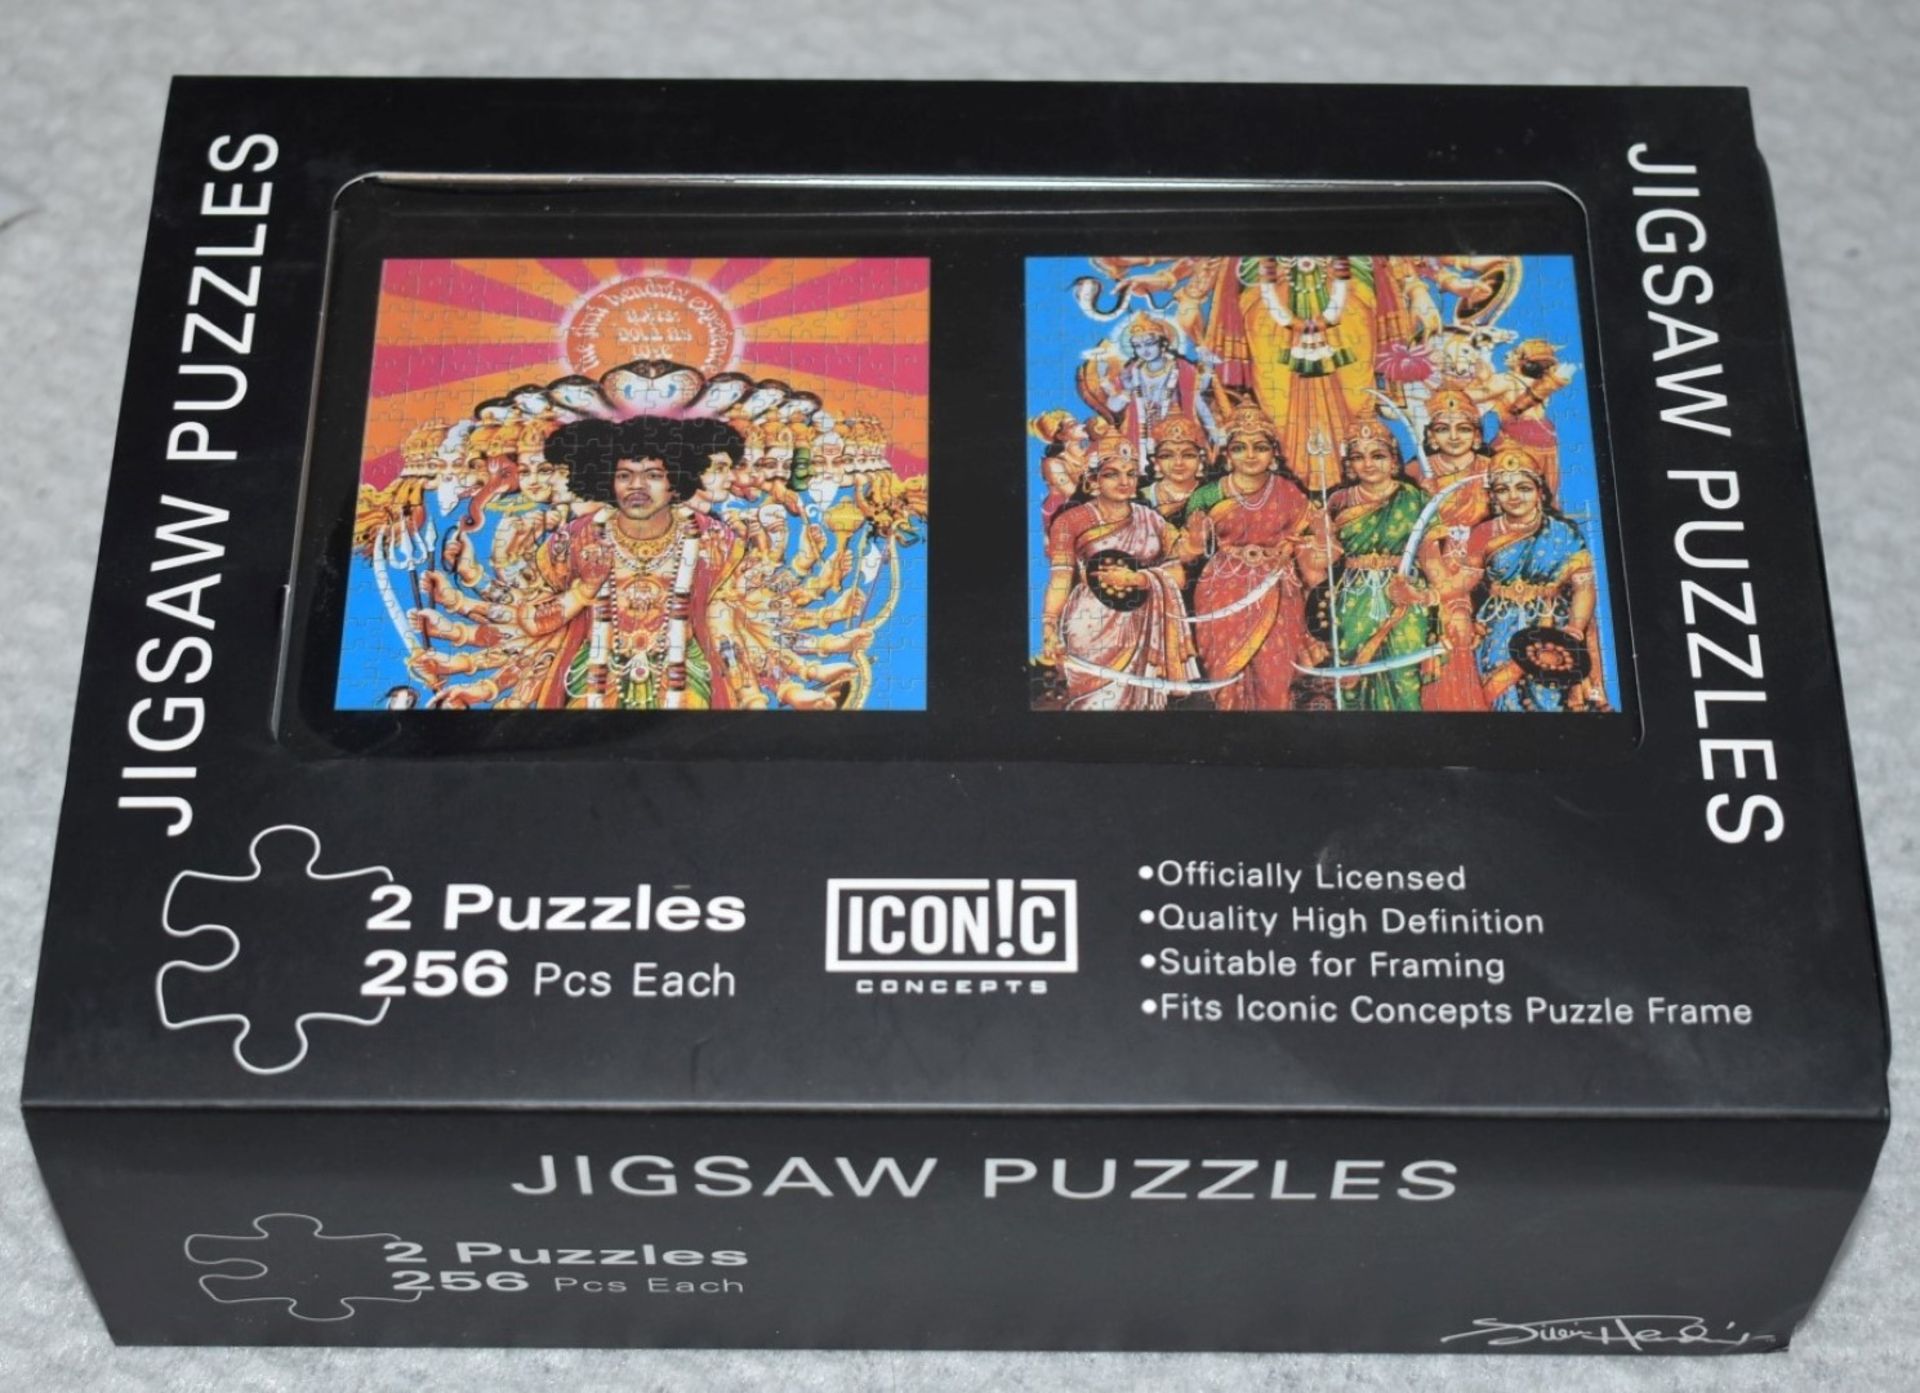 1 x Jimmy Hendrix Jigsaw Puzzle Set By Iconic Concepts - Includes 2 x 256pc Jigsaws in Collectors - Image 2 of 6